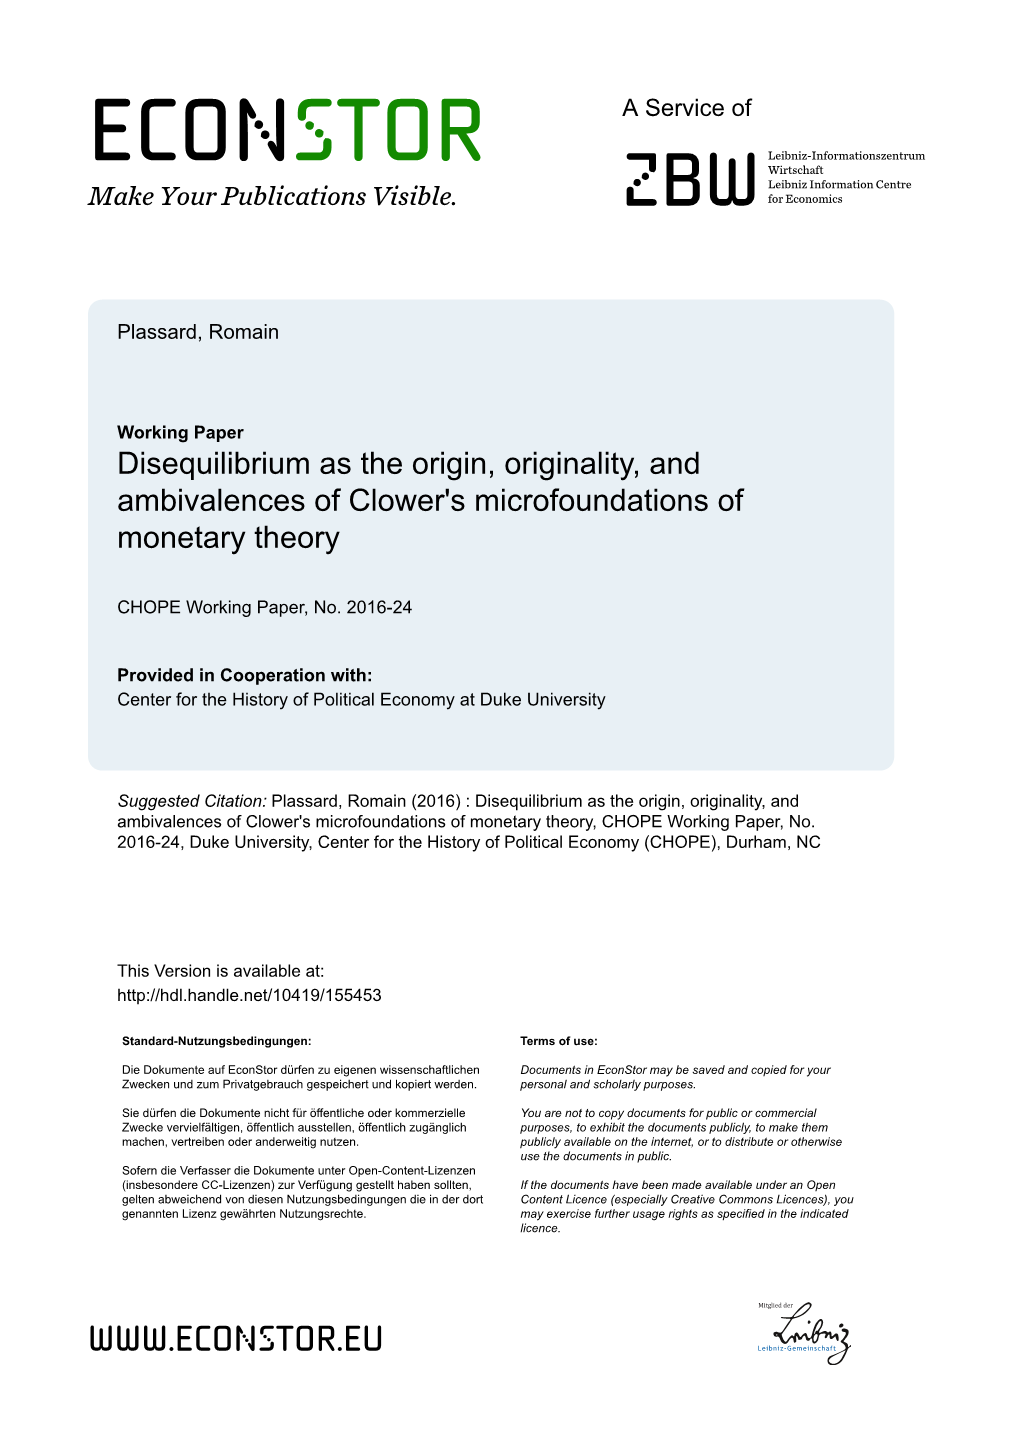 Disequilibrium As the Origin, Originality, and Ambivalences of Clower's Microfoundations of Monetary Theory